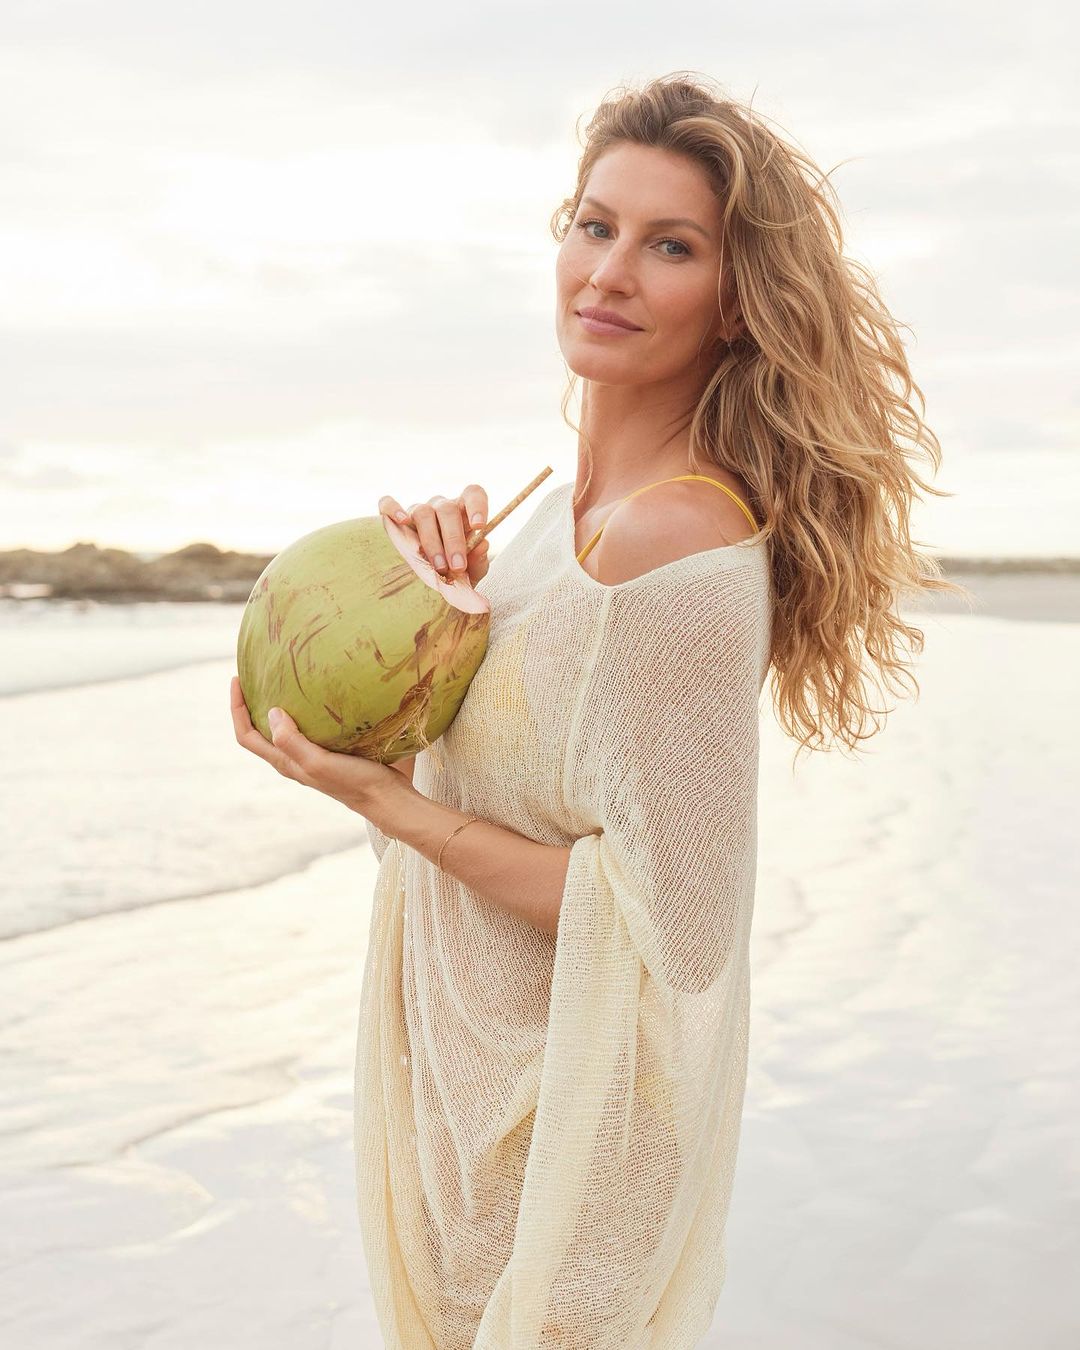 Photos n°1 : Gisele Wants to Help You Manage The Holiday Stress!